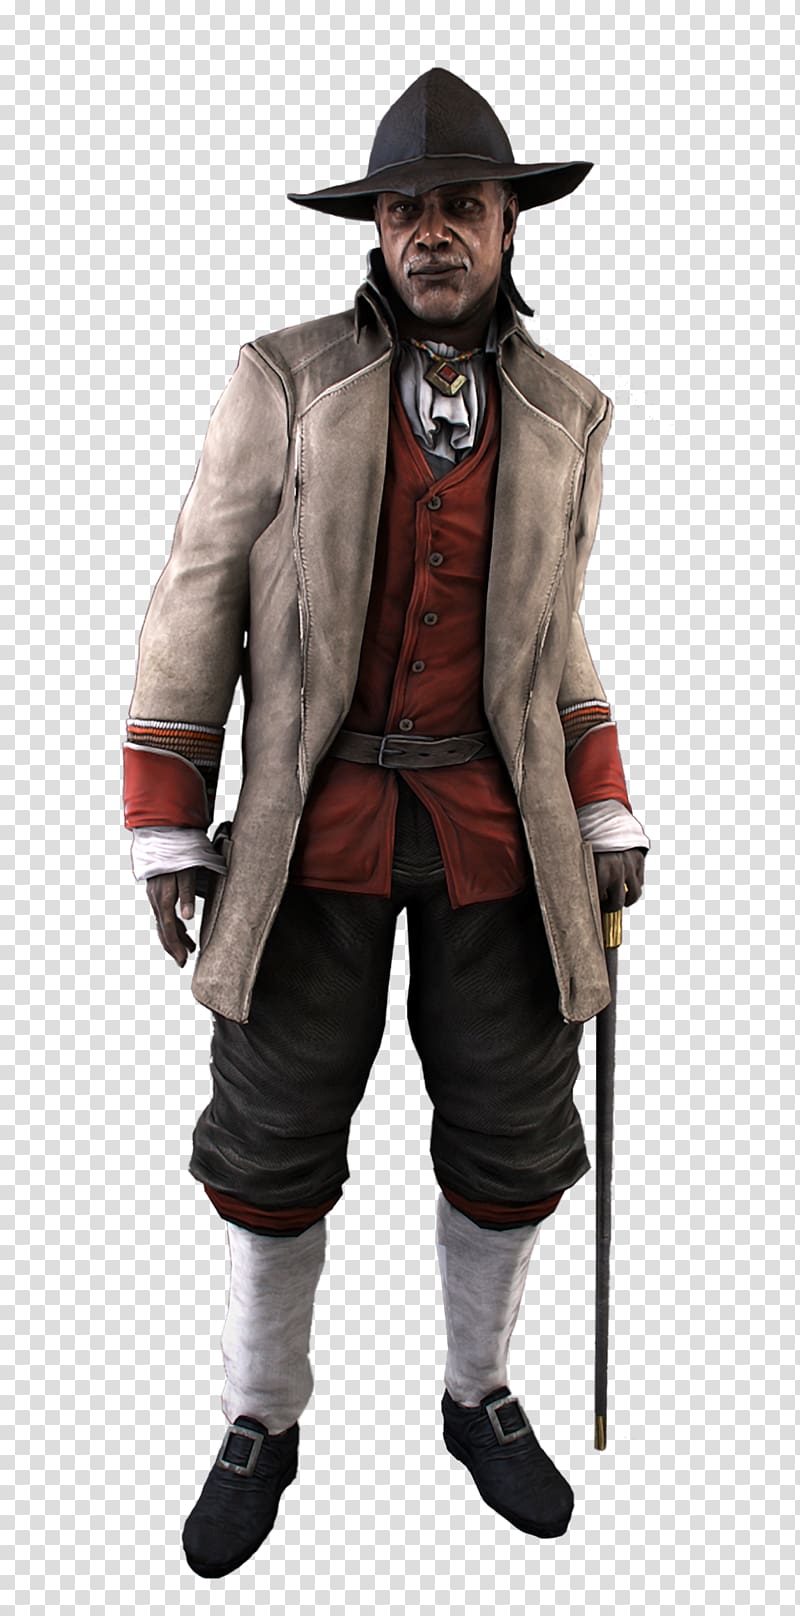 Assassin\'s Creed III Assassin\'s Creed: Brotherhood Assassin\'s Creed Rogue Achilles, others transparent background PNG clipart